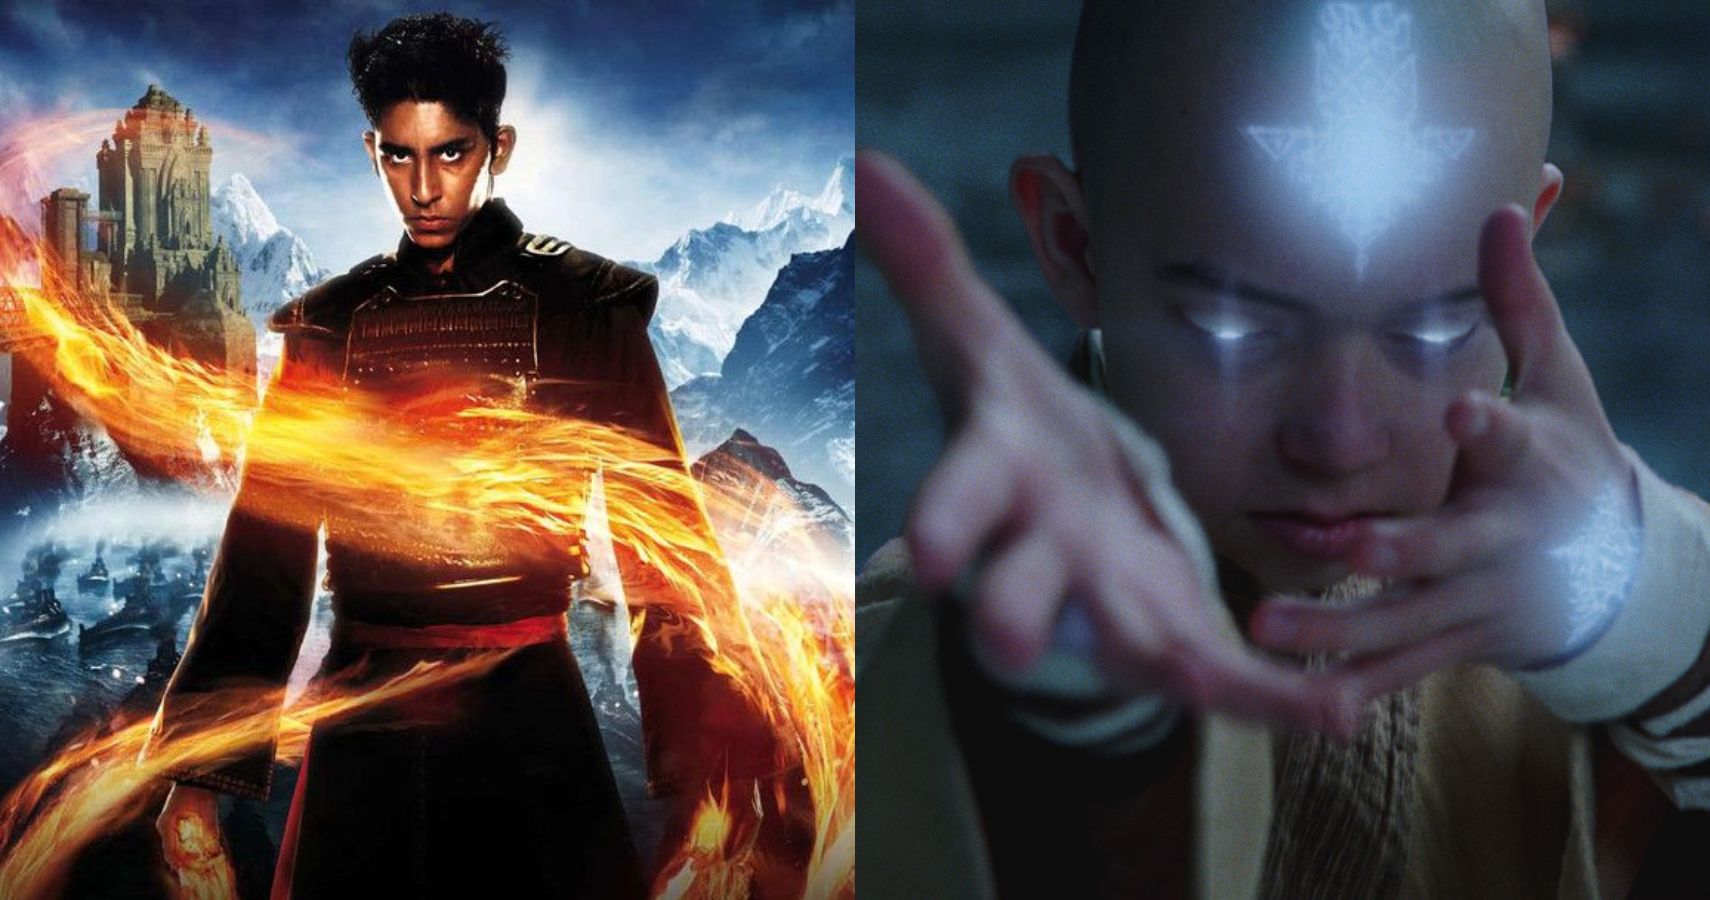 The Last Airbender: 10 Things The Netflix Series Should Fix